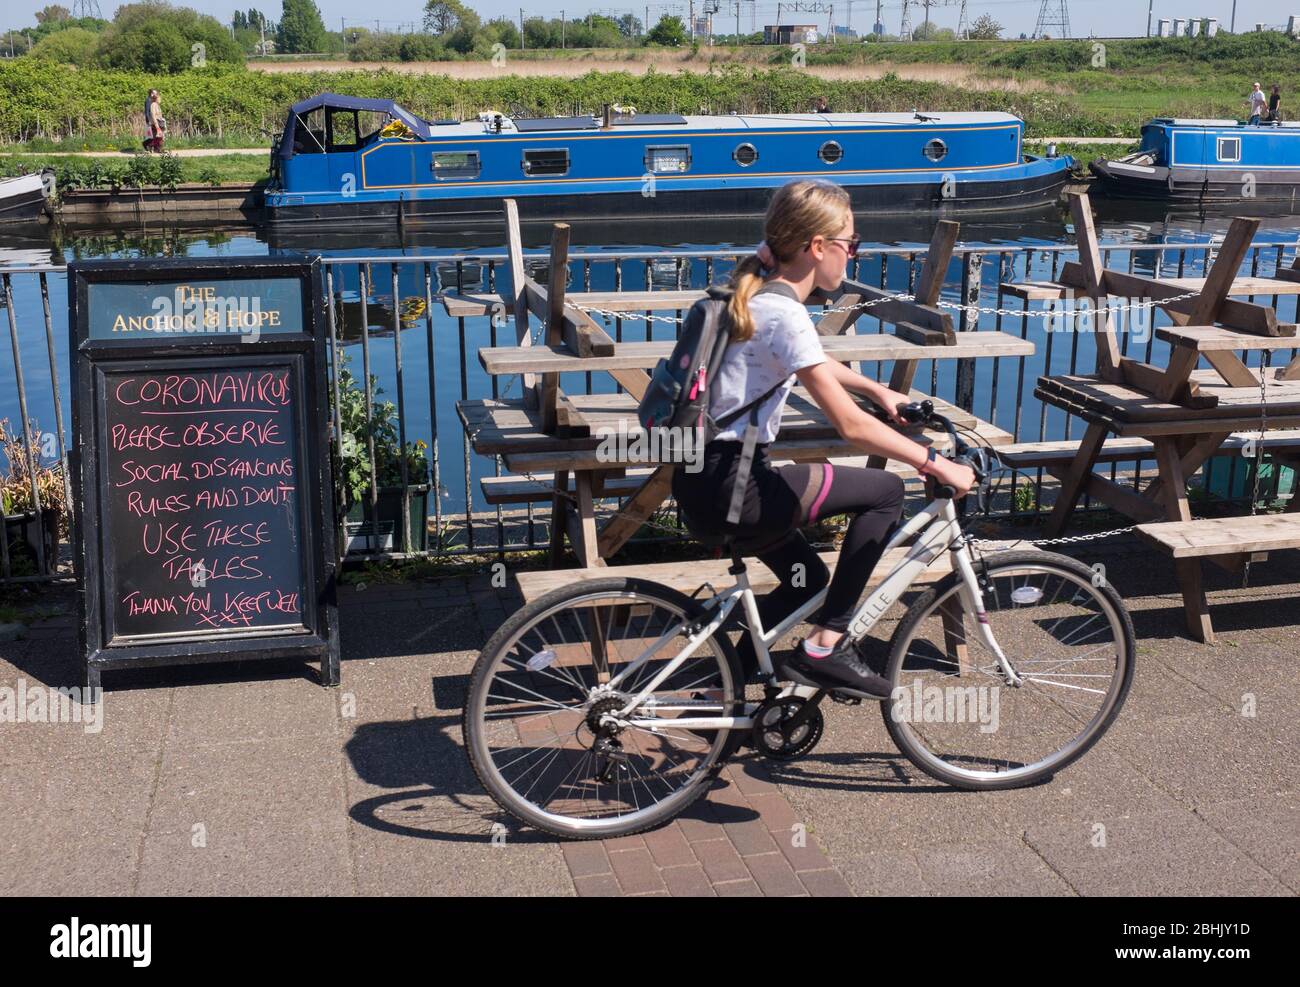 Cyclist in London rides past closed pub by River Lea during coronavirus lockdown with sign asking public to respect social distancing during Covid-19 Stock Photo